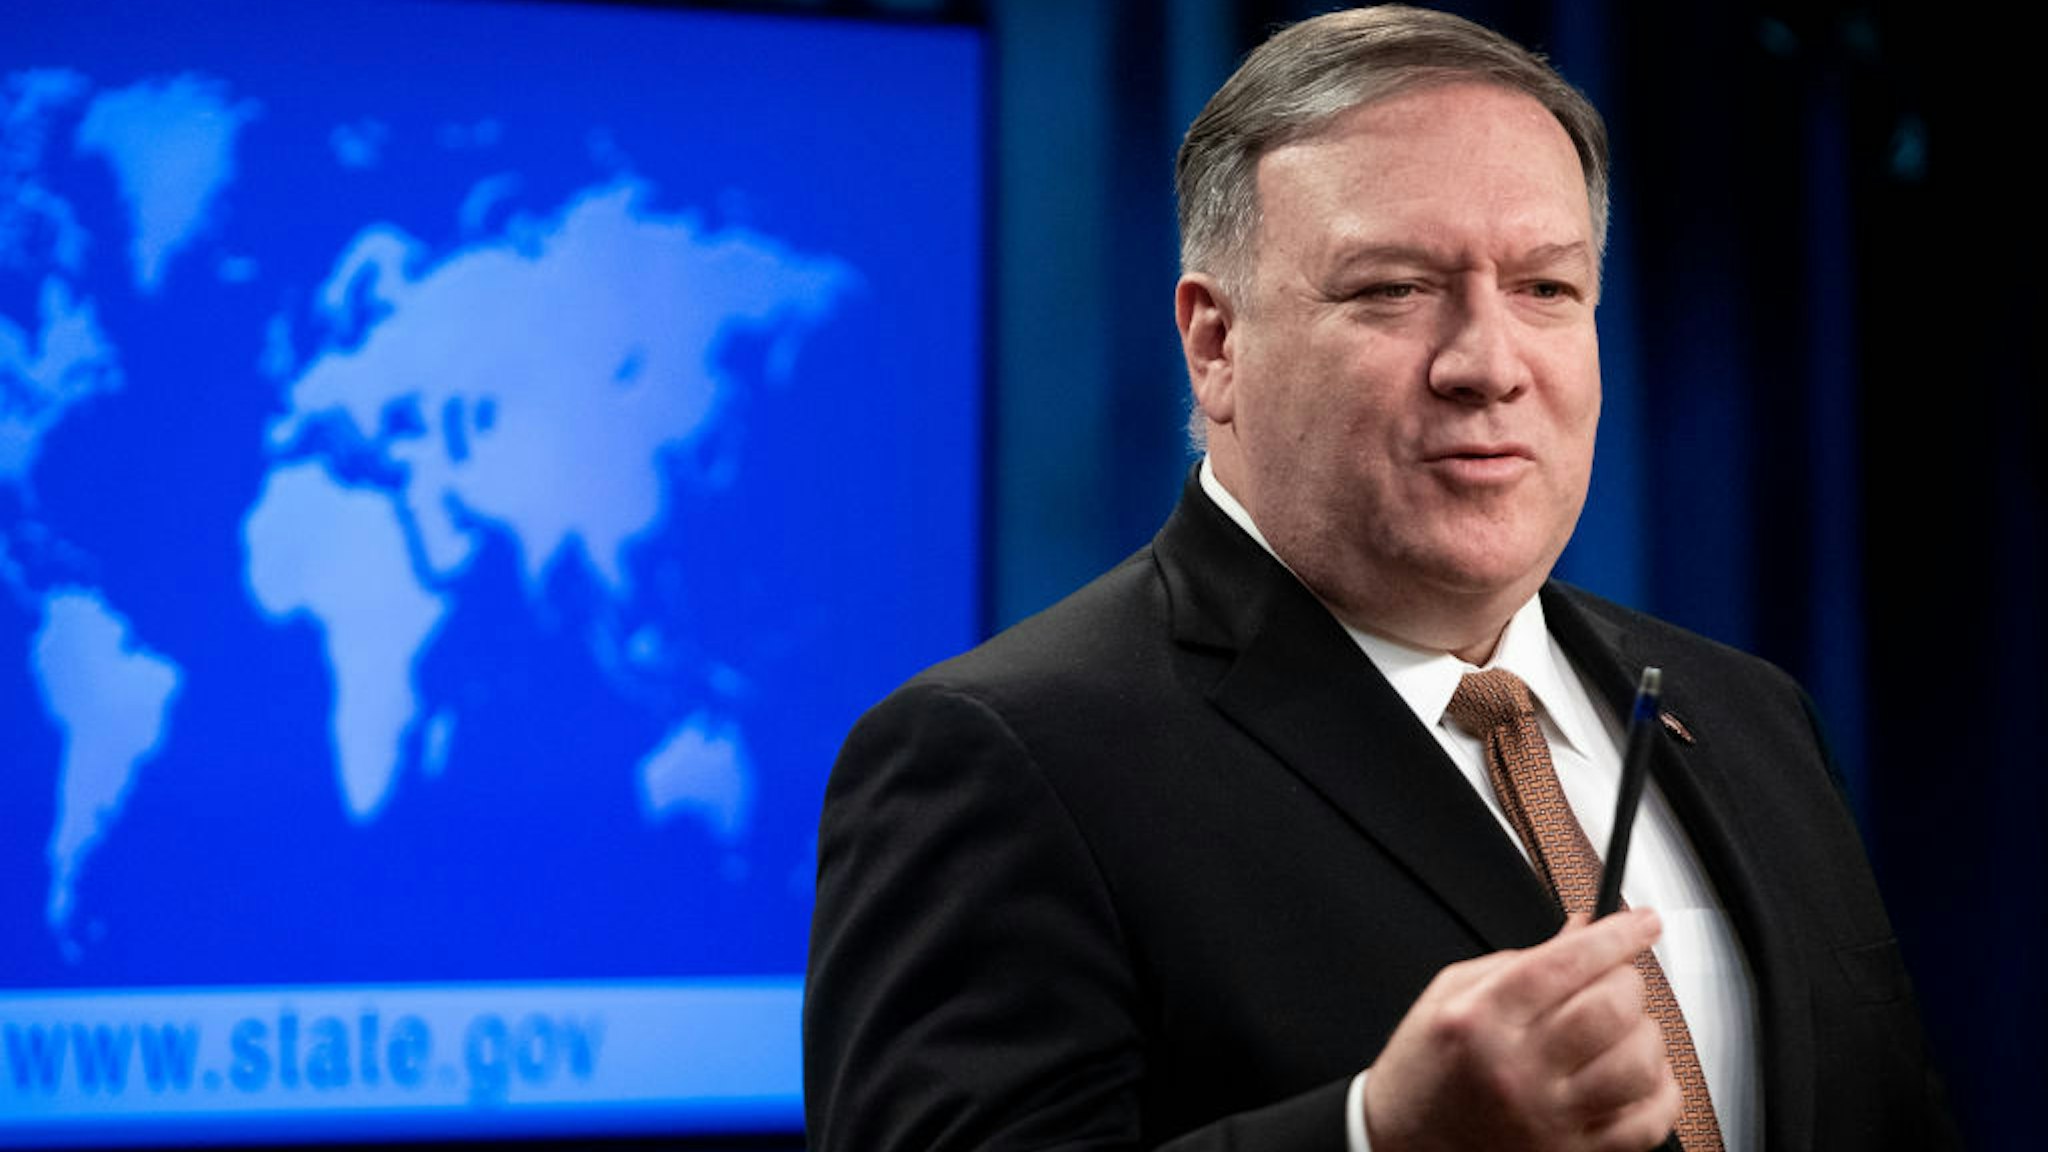 US Secretary of State Mike Pompeo announces that the US will designate Iran's Islamic Revolutionary Guard Corps (IRGC) as a Foreign Terrorist Organization (FTO) during a press conference at the State Department in Washington, DC, April 8, 2019. - President Donald Trump on April 8, 2019 announced the United States is designating Iran's elite military force, the Islamic Revolutionary Guard Corps, a terrorist organization. Trump said in a statement that the "unprecedented" move "recognizes the reality that Iran is not only a State Sponsor of Terrorism, but that the IRGC actively participates in, finances, and promotes terrorism as a tool of statecraft." (Photo by SAUL LOEB / AFP) (Photo credit should read SAUL LOEB/AFP/Getty Images)